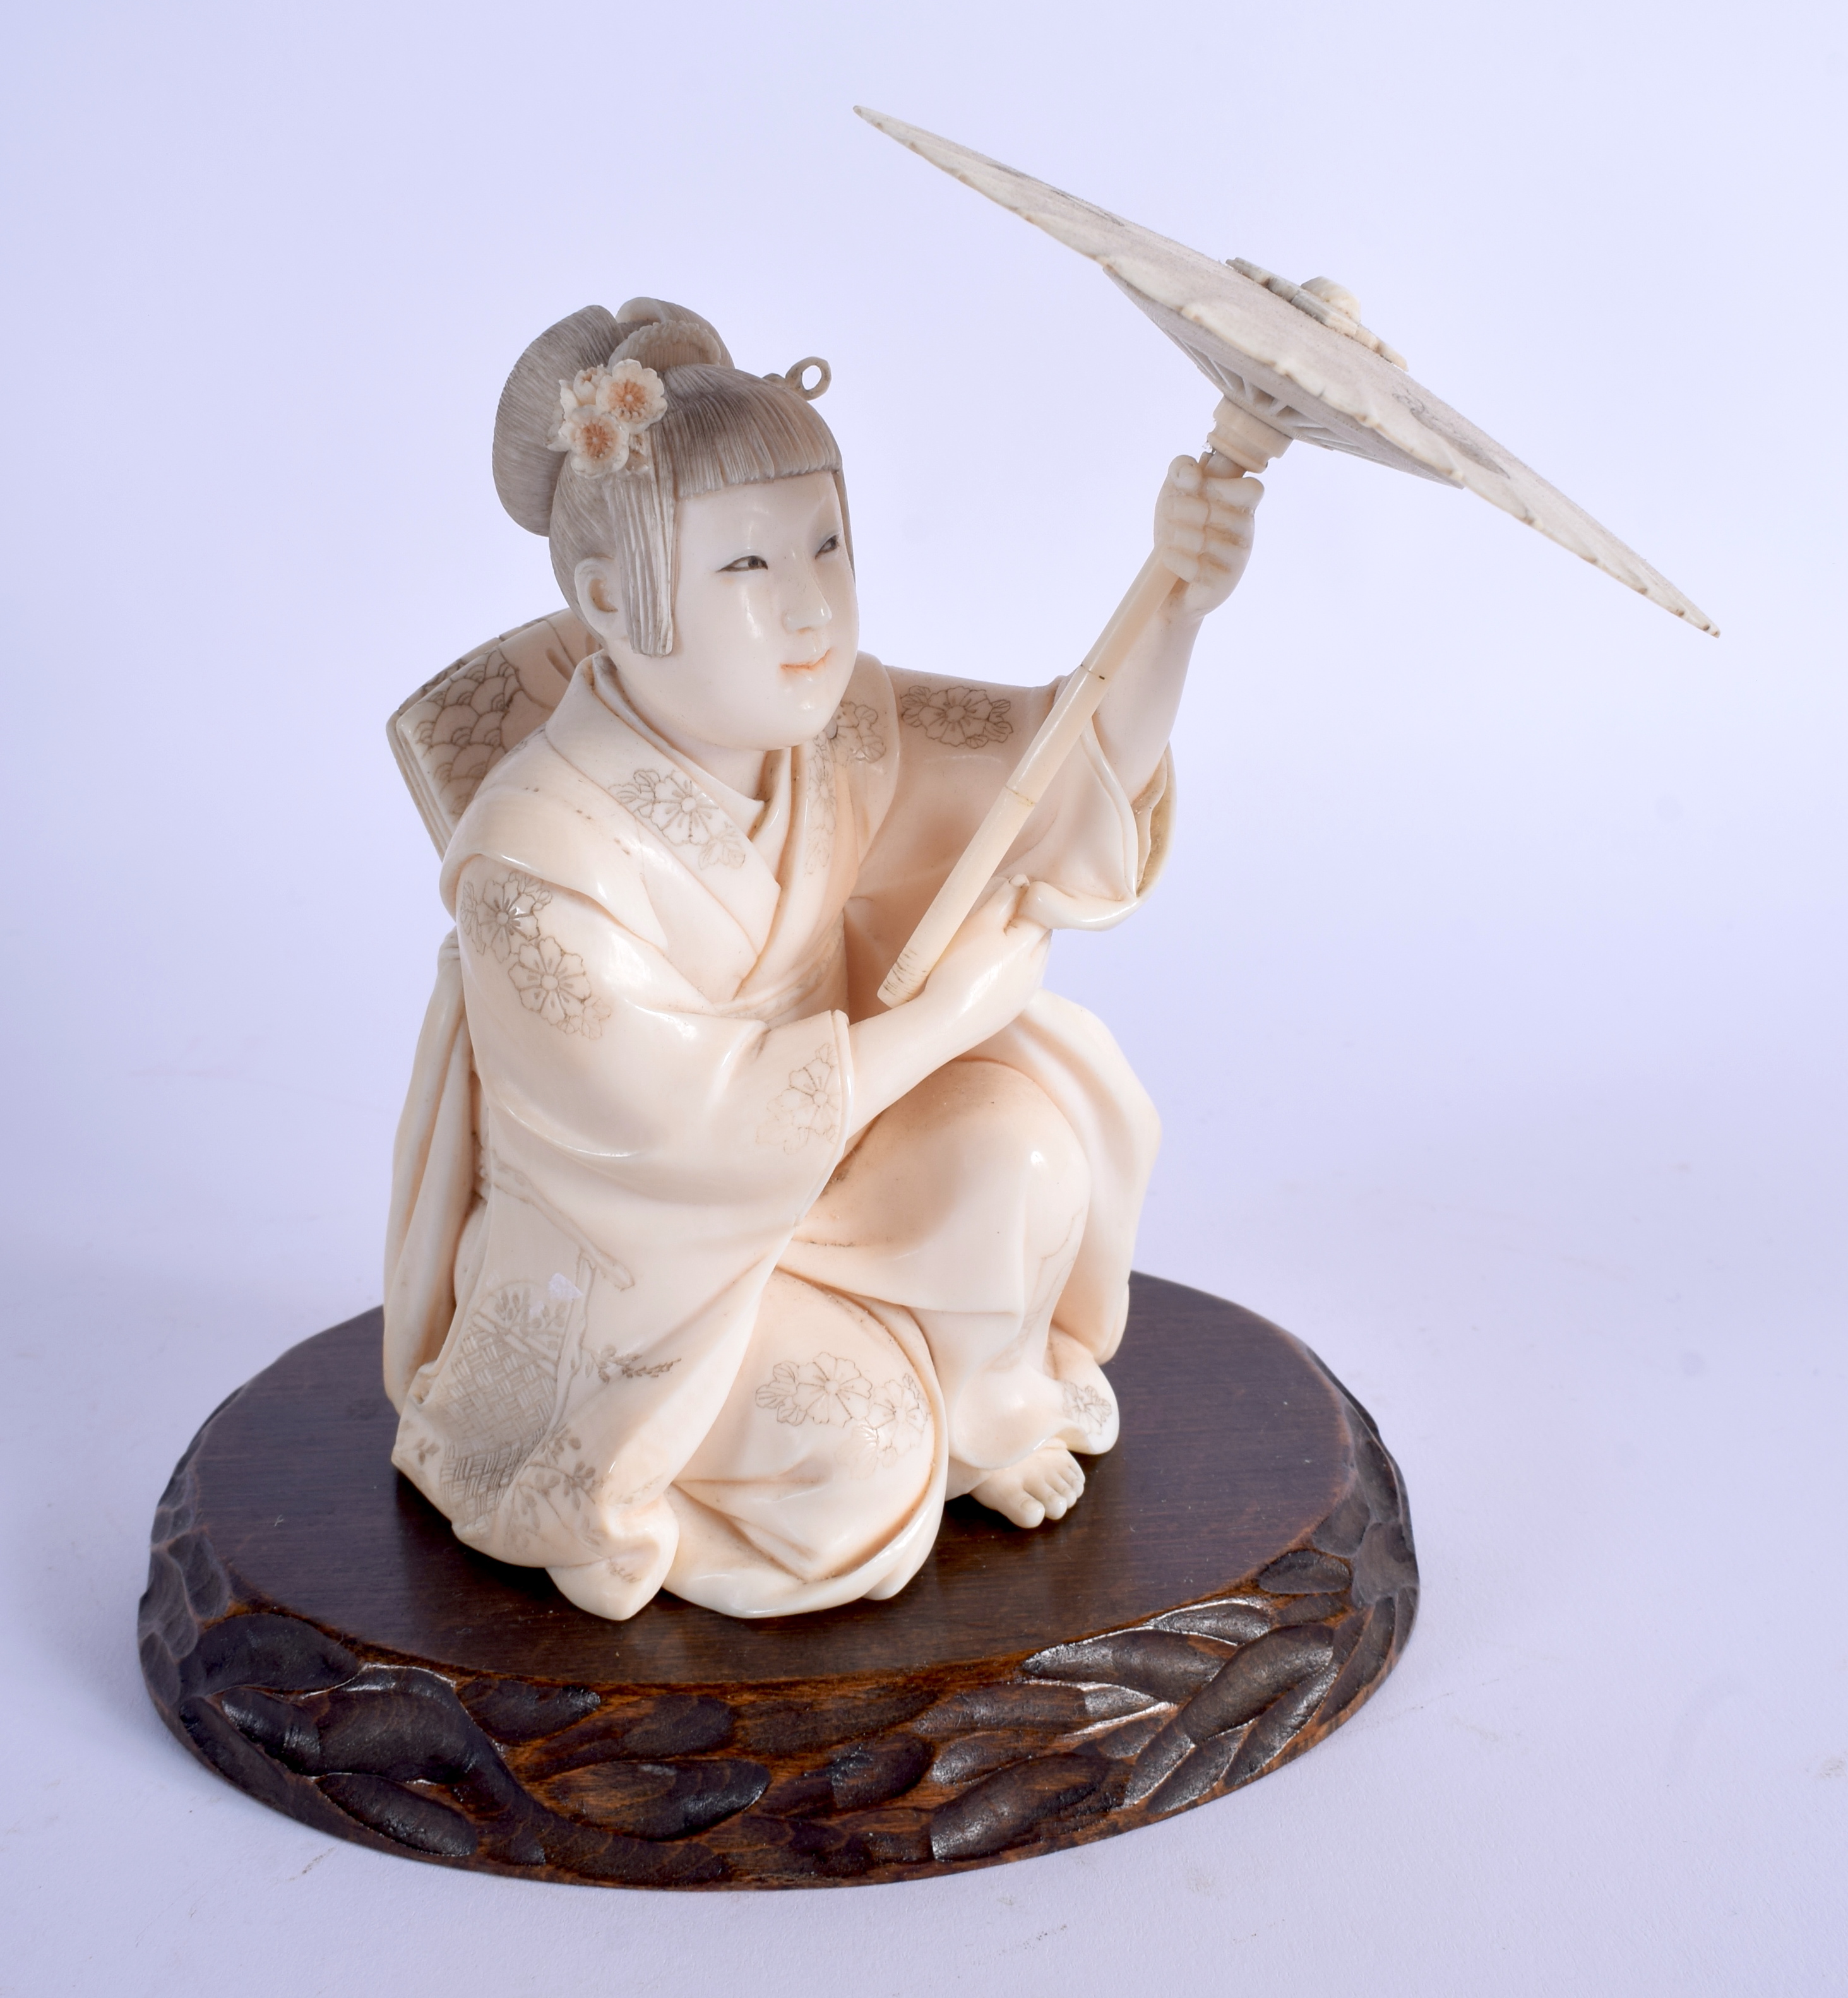 A FINE 19TH CENTURY JAPANESE MEIJI PERIOD CARVED IVORY OKIMONO modelled as a female sheltering under